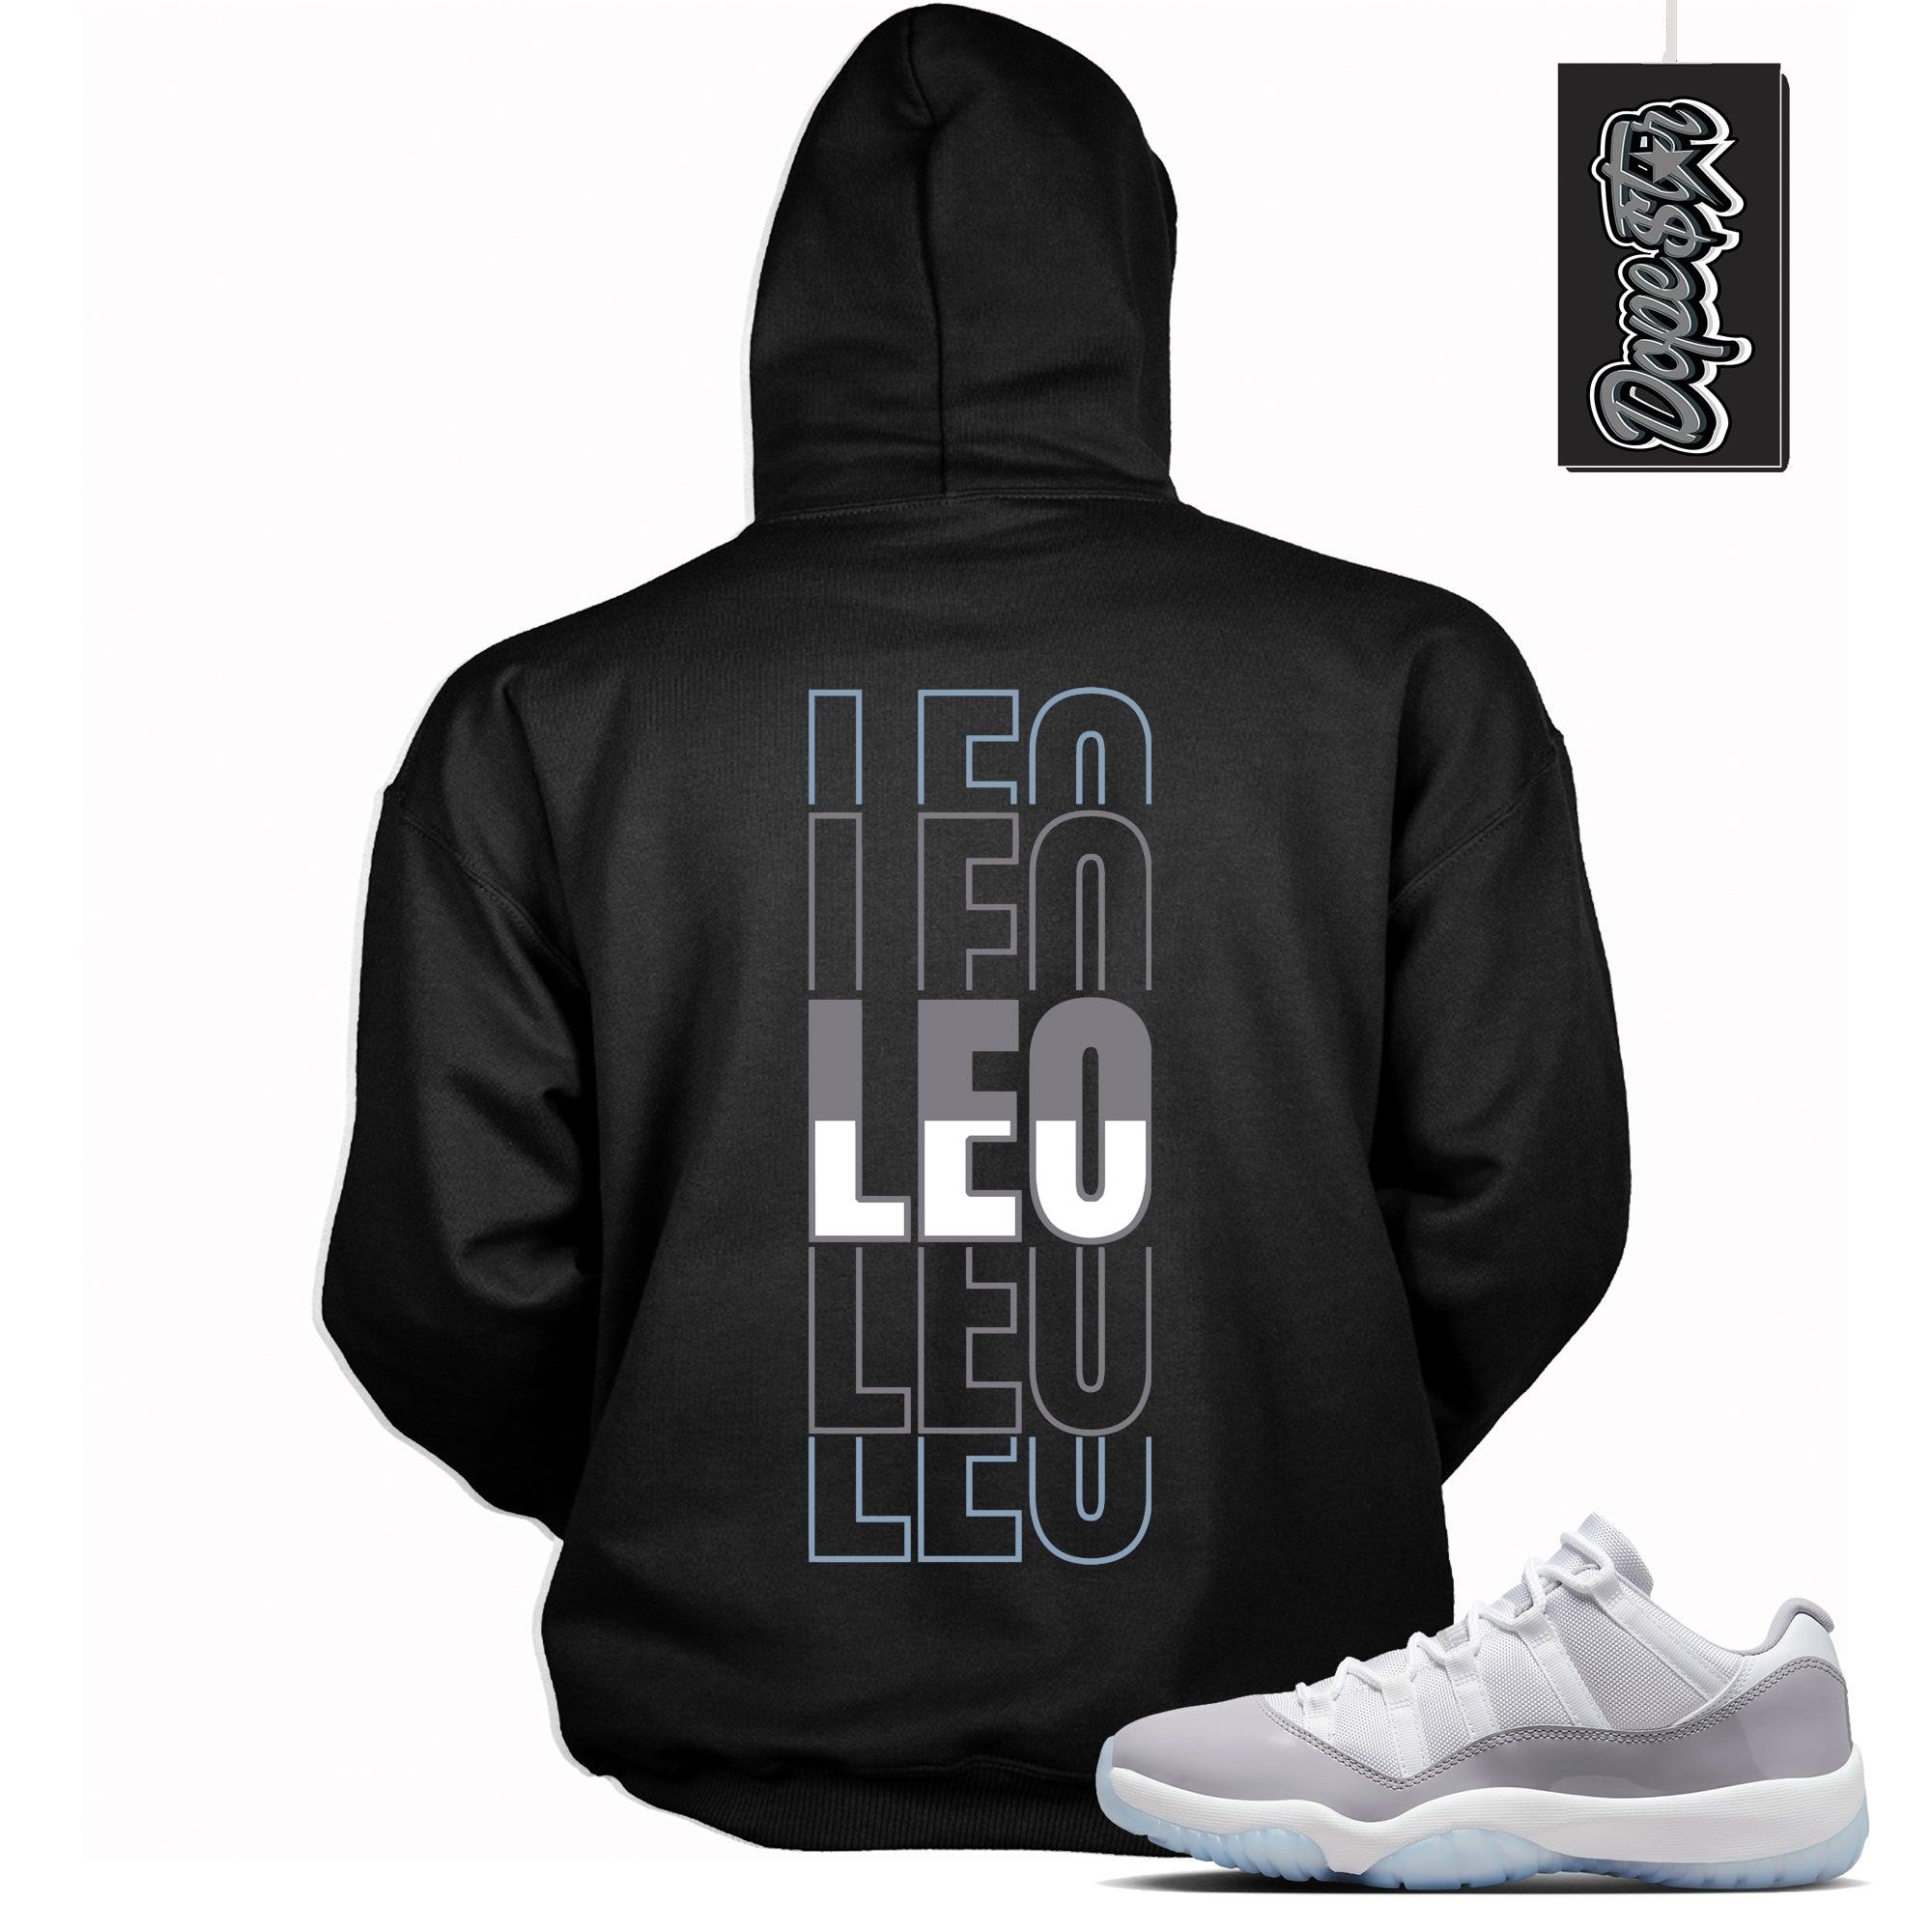 Cool Black Graphic Hoodie with “ LEO  “ print, that perfectly matches Air Jordan 11 Retro Low Cement Grey sneakers